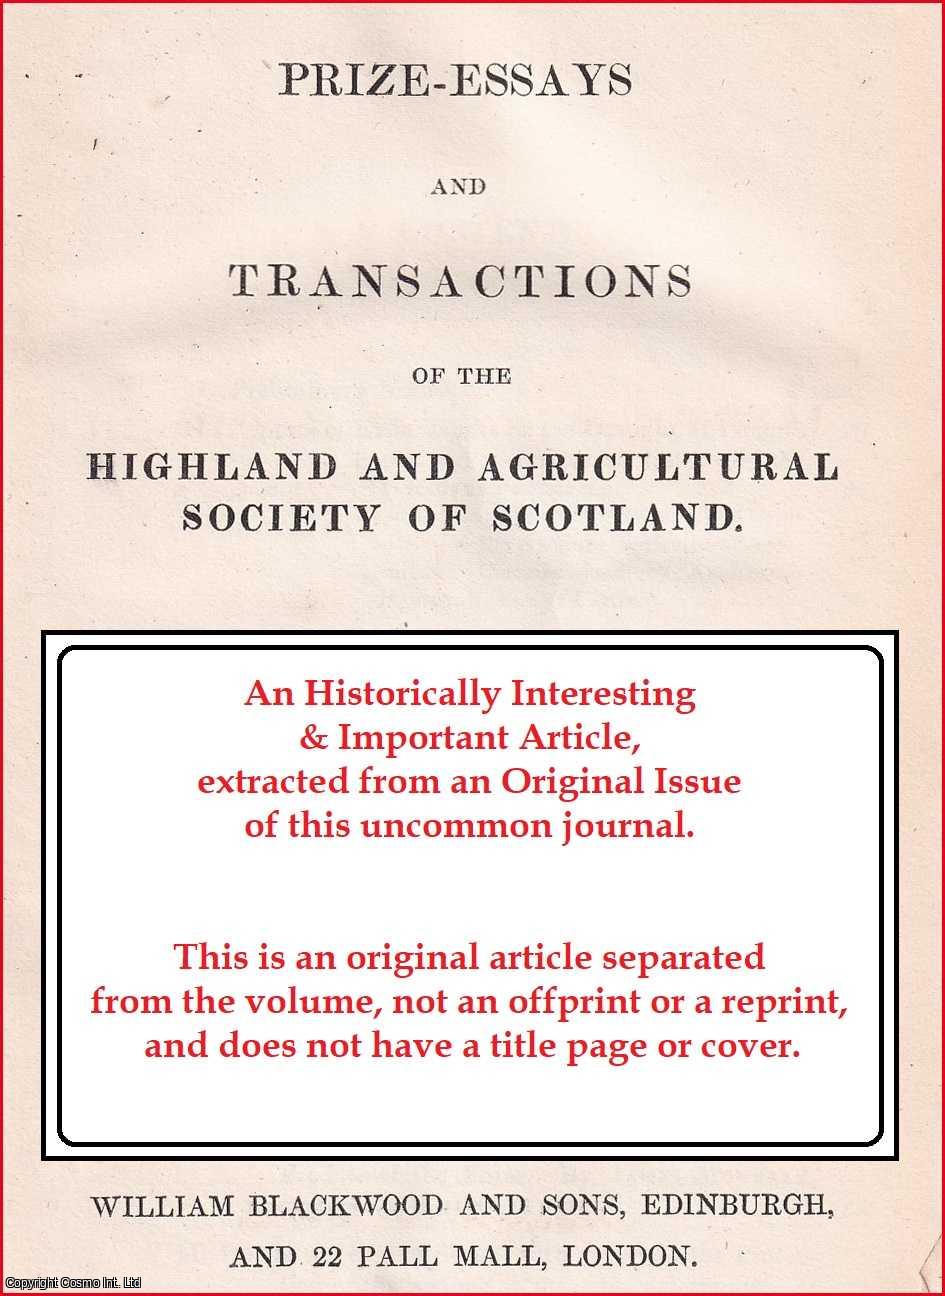 John Robison, Esq. Sec. R.S.E. - The Means of Improving the Supply of Fattened Poultry for the Markets of Great Towns. An uncommon original article from the Prize Essays and Transactions of the Highland Society of Scotland, 1835.